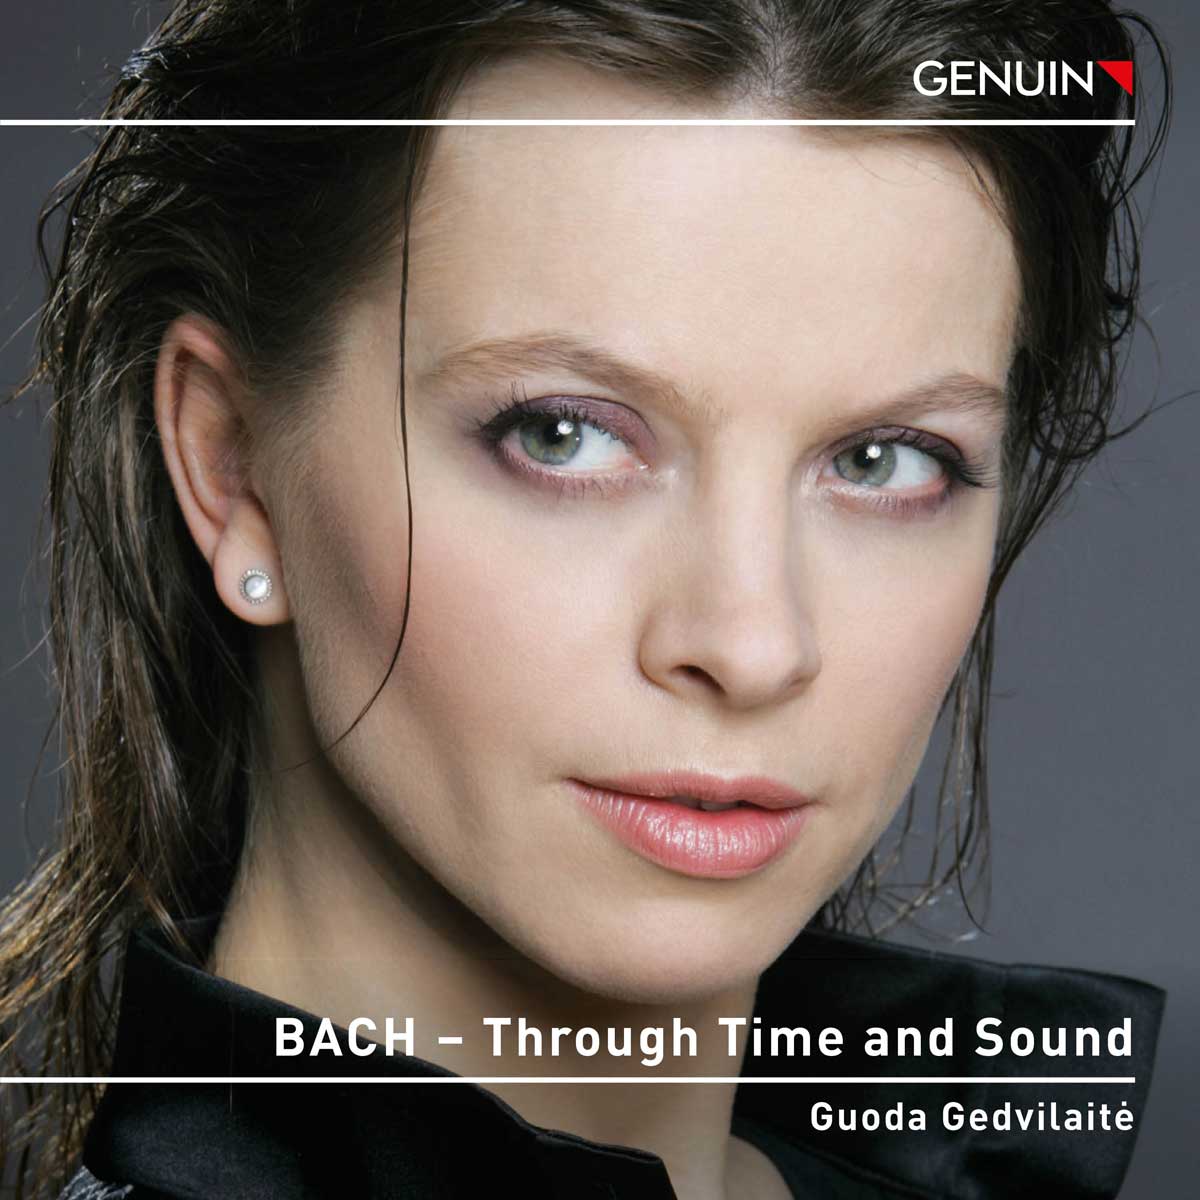 CD album cover 'Bach - Through Time and Sound' (GEN 24876d) with Guoda Gedvilaite